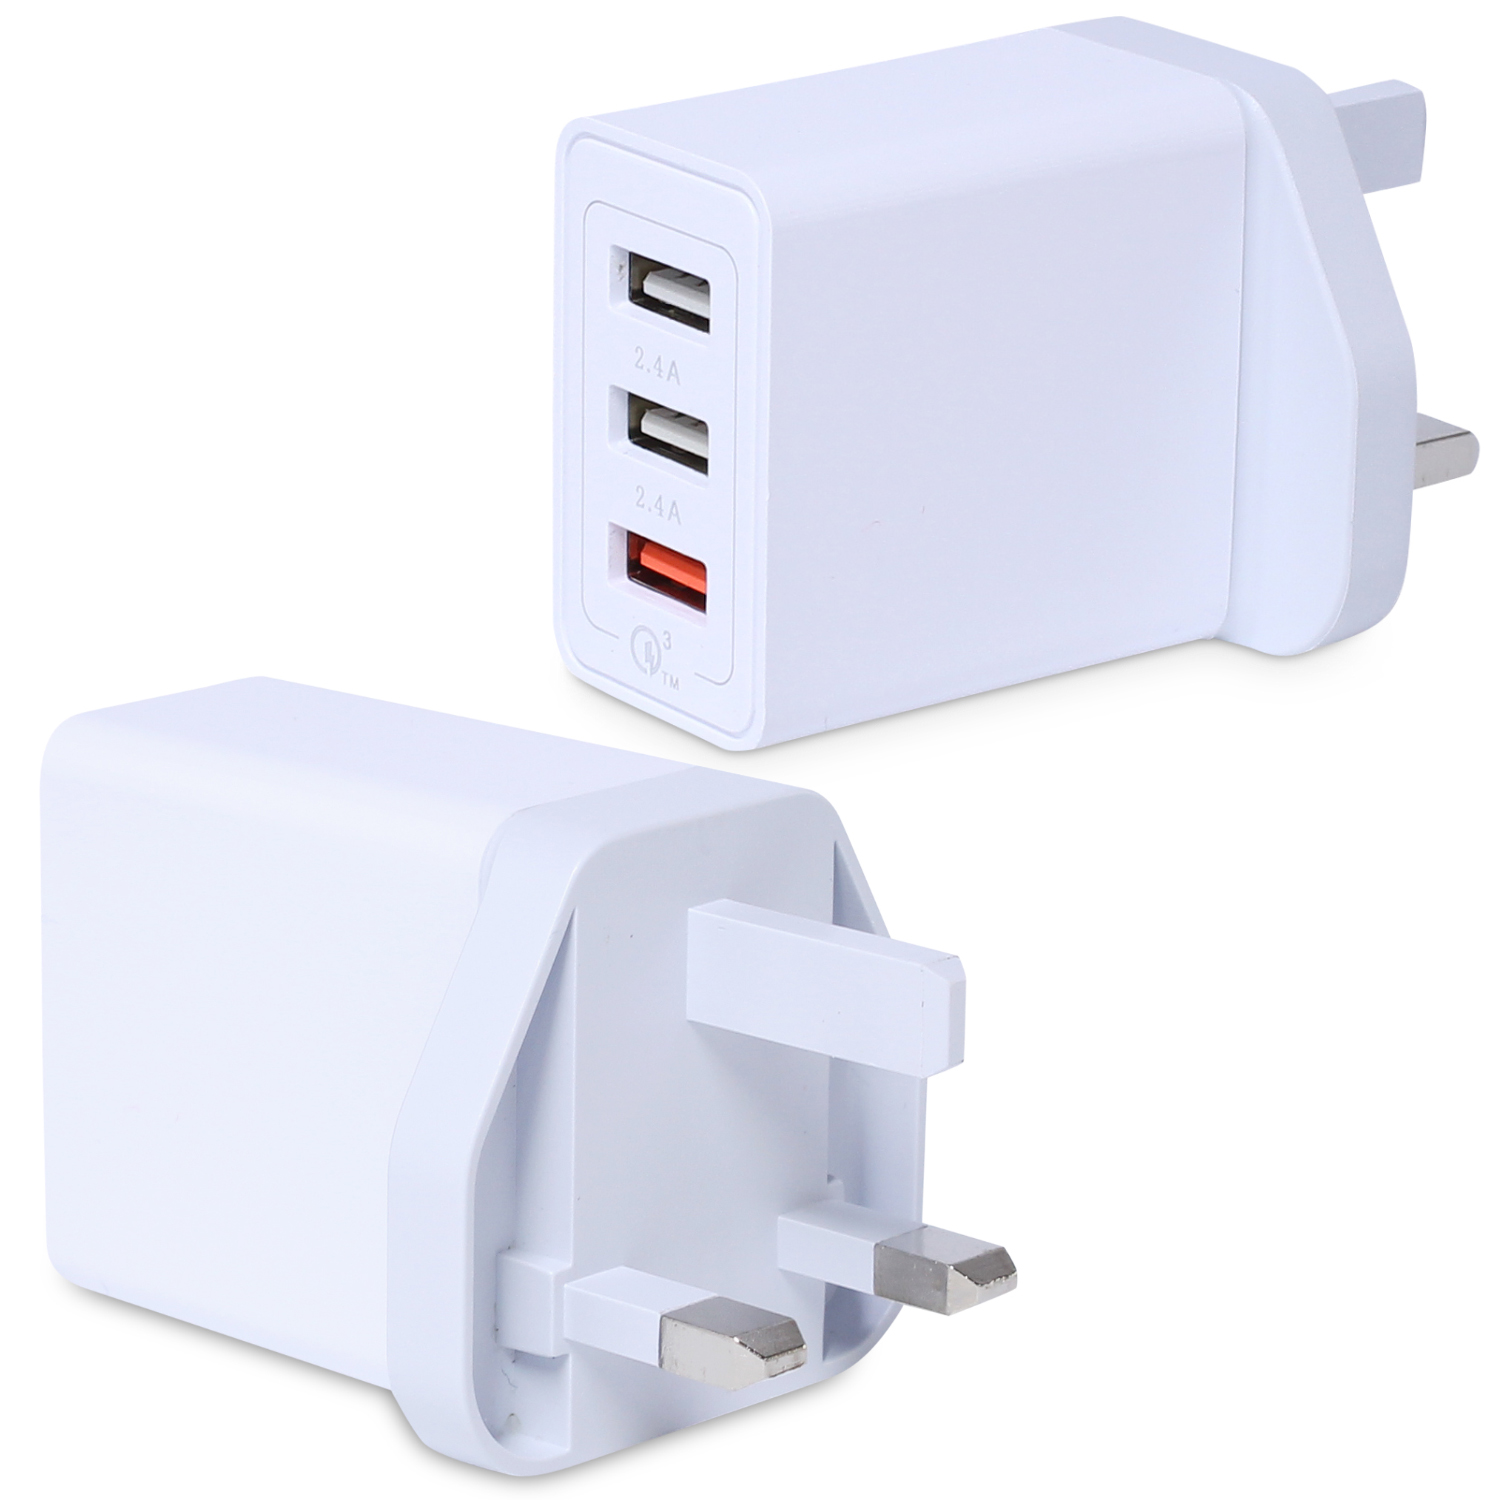 Wahlee Online Store. MOXOM SINGLE USB PORT QUALCOMM QUICK CHARGE 3.0 FAST  CHARGING UK ADAPTER KH-67